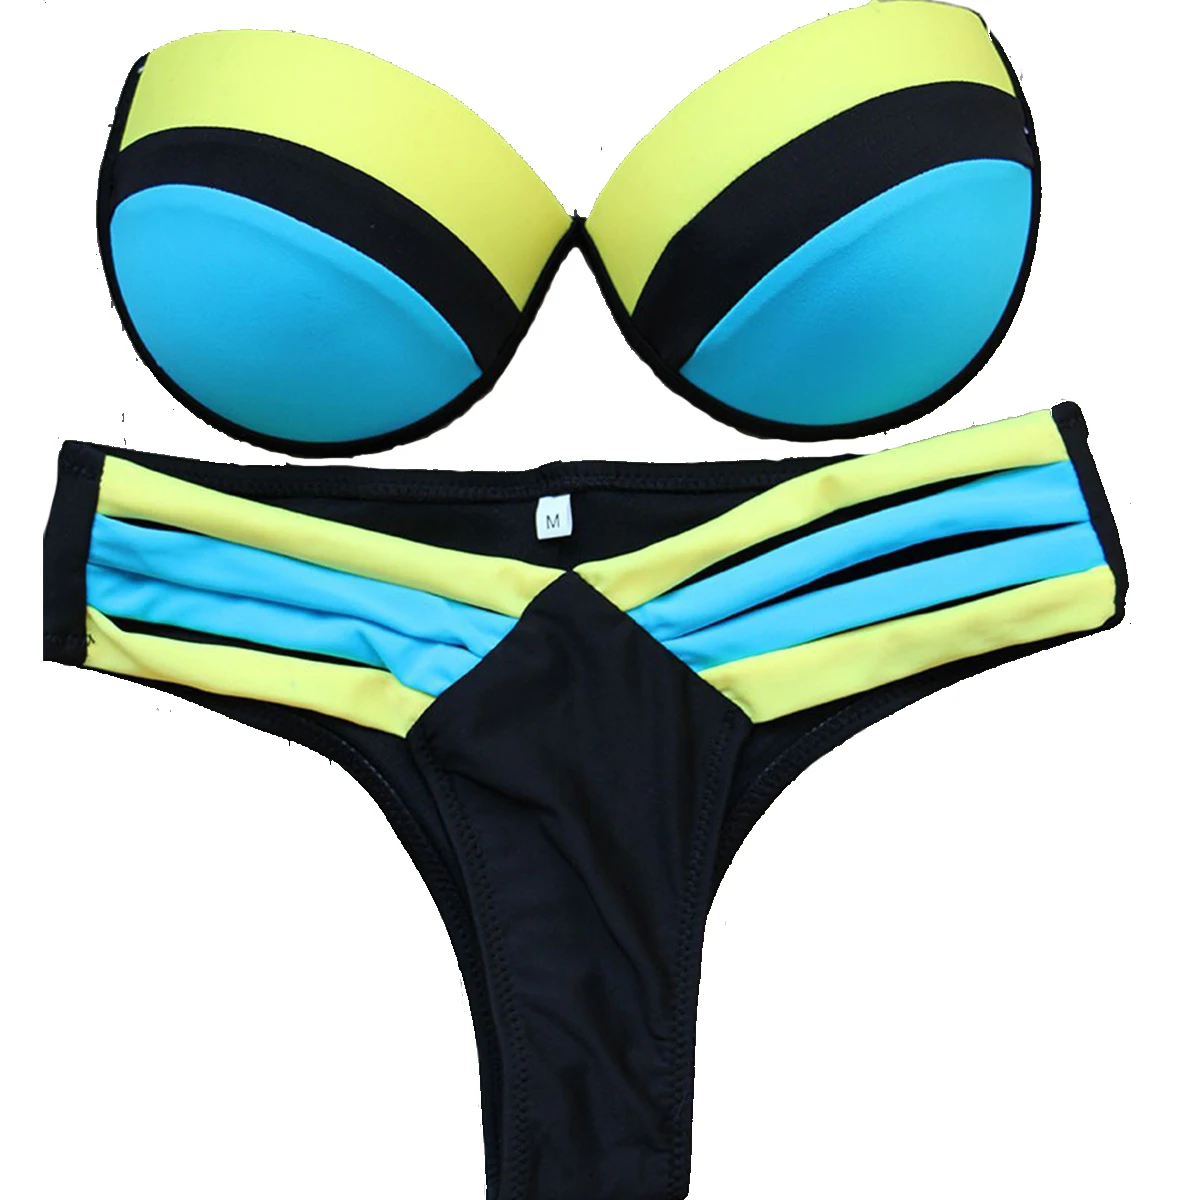 Women S Sexy Push Up Two Piece Separate Bandage Halter Swimsuits Bikinis Sets Biquini Swimsuits